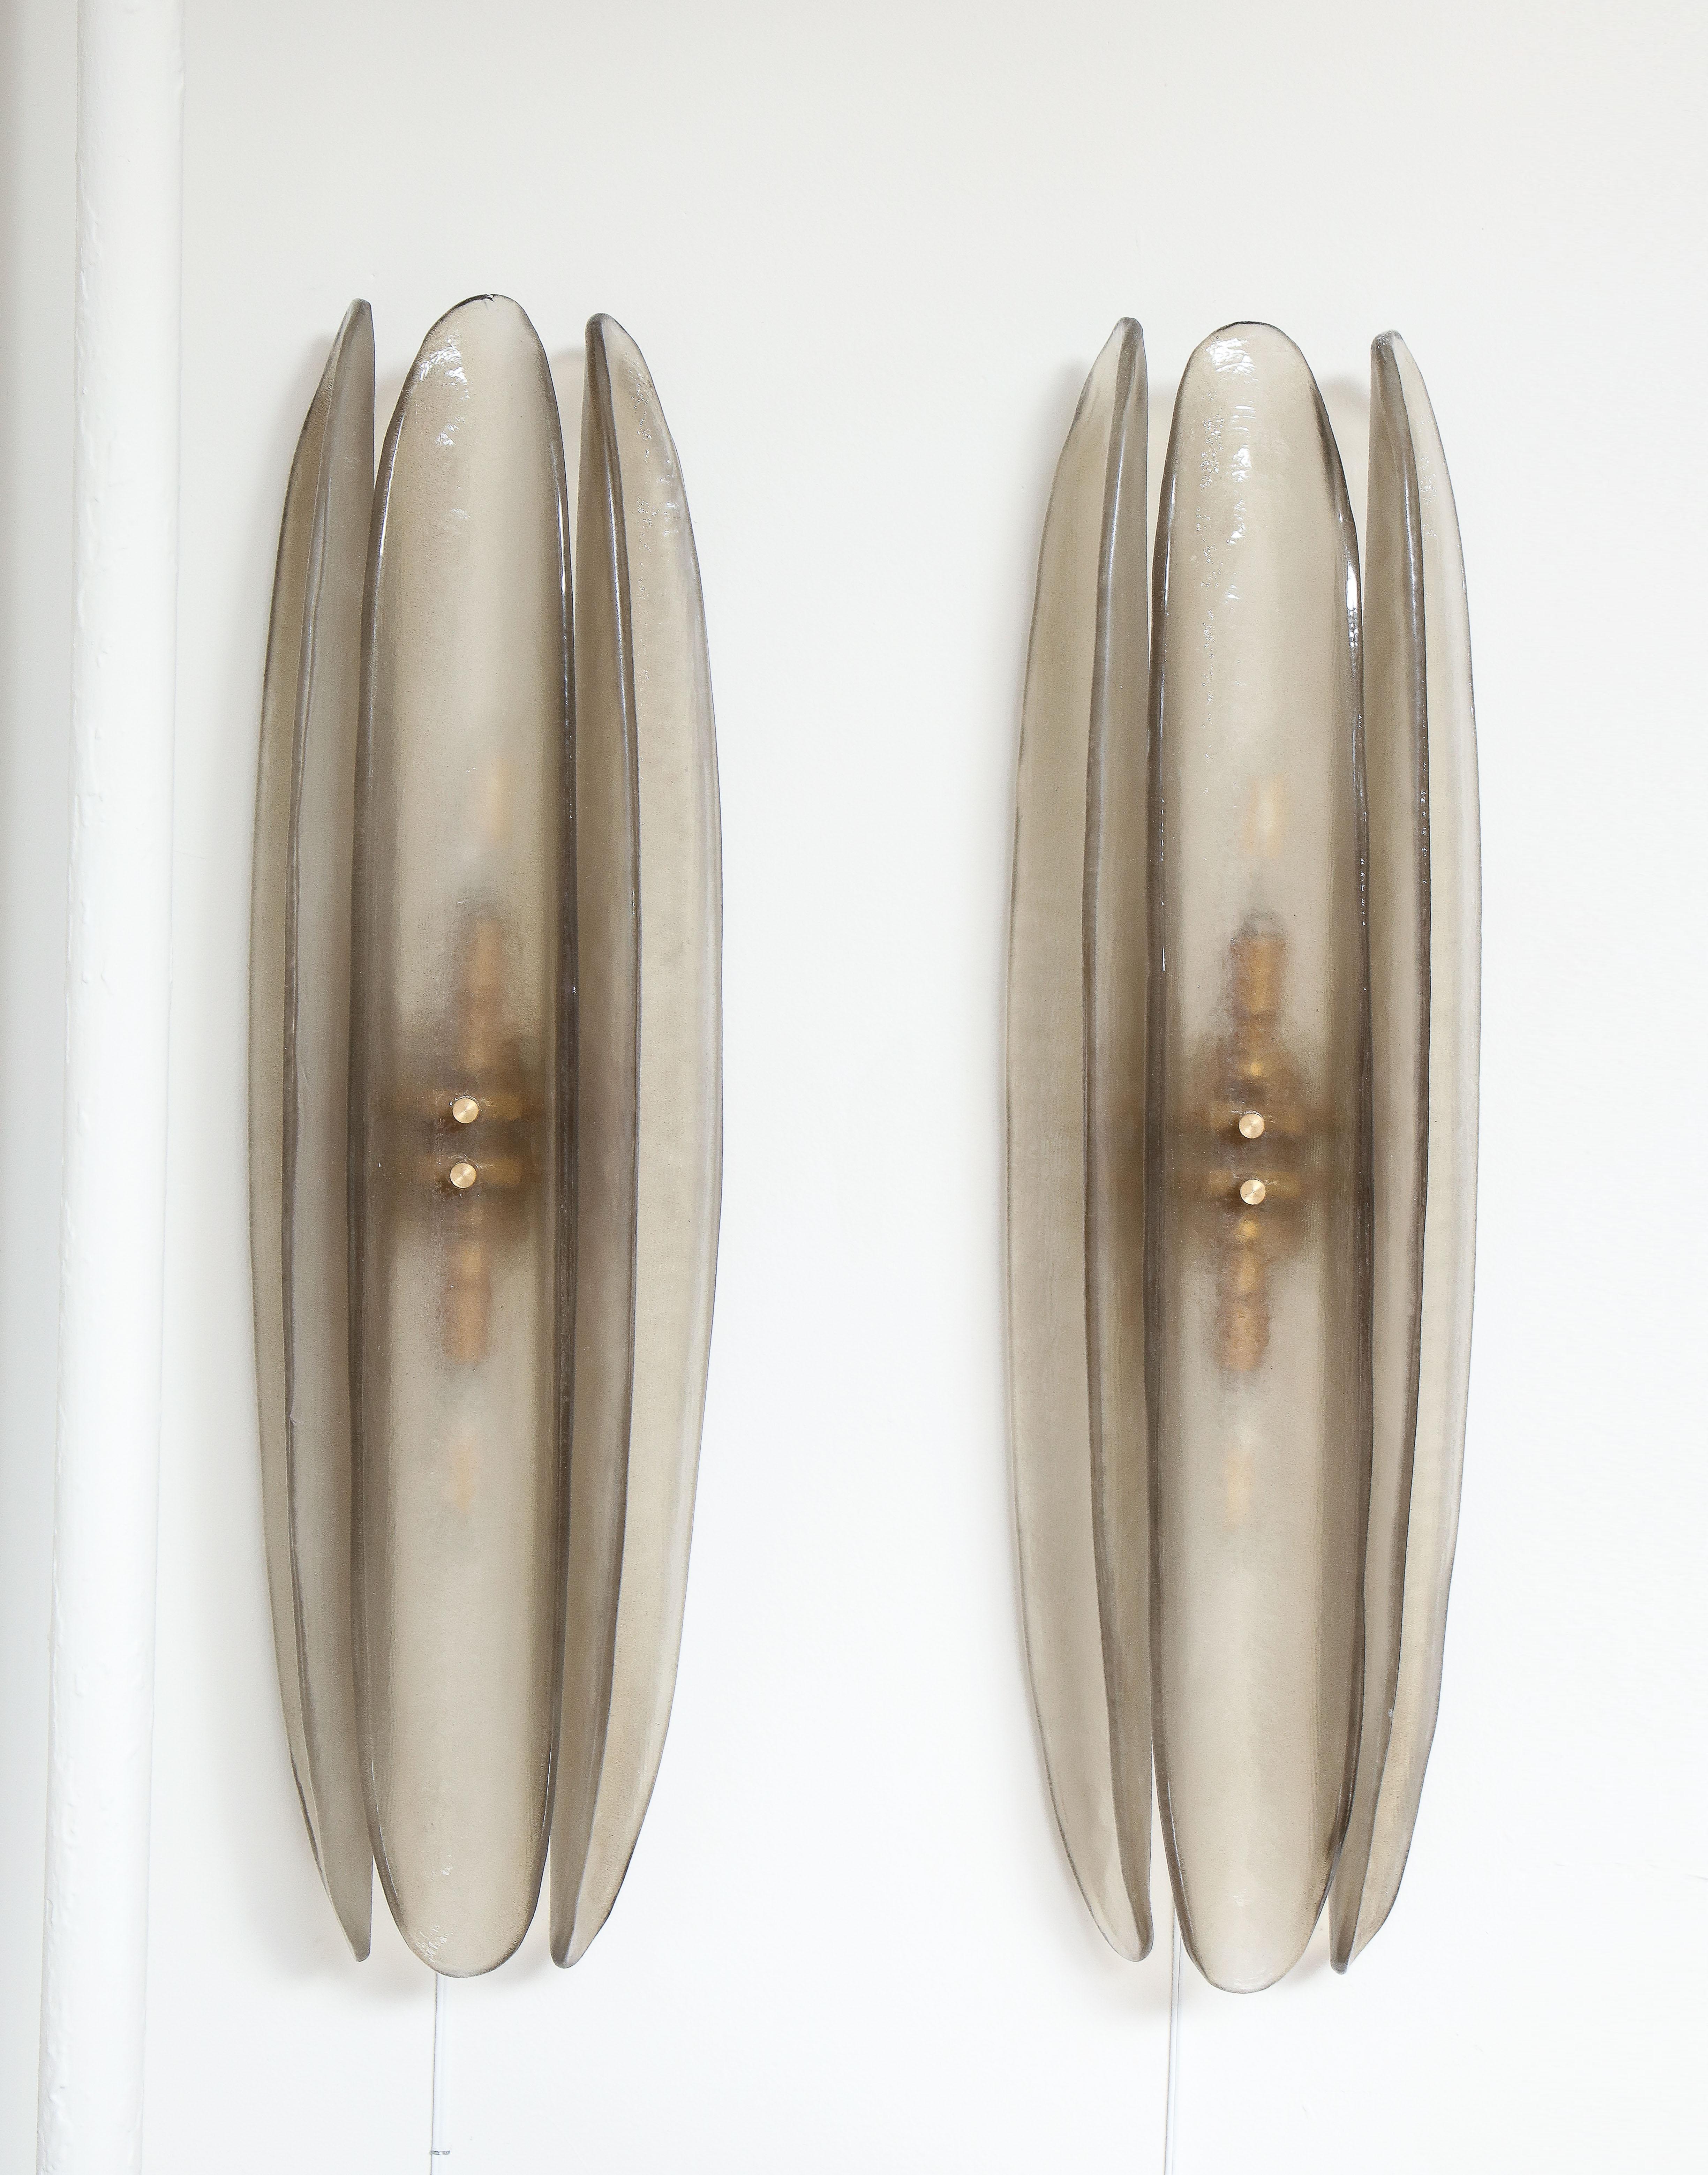 Tall and slender pair of smoked grey Taupe Murano Glass sconces consisting of 3 oval and concave glass elements mounted on a brass frame. The Murano Glass was hand-casted in a neutral, smoked grey taupe color which lends itself to a variety of